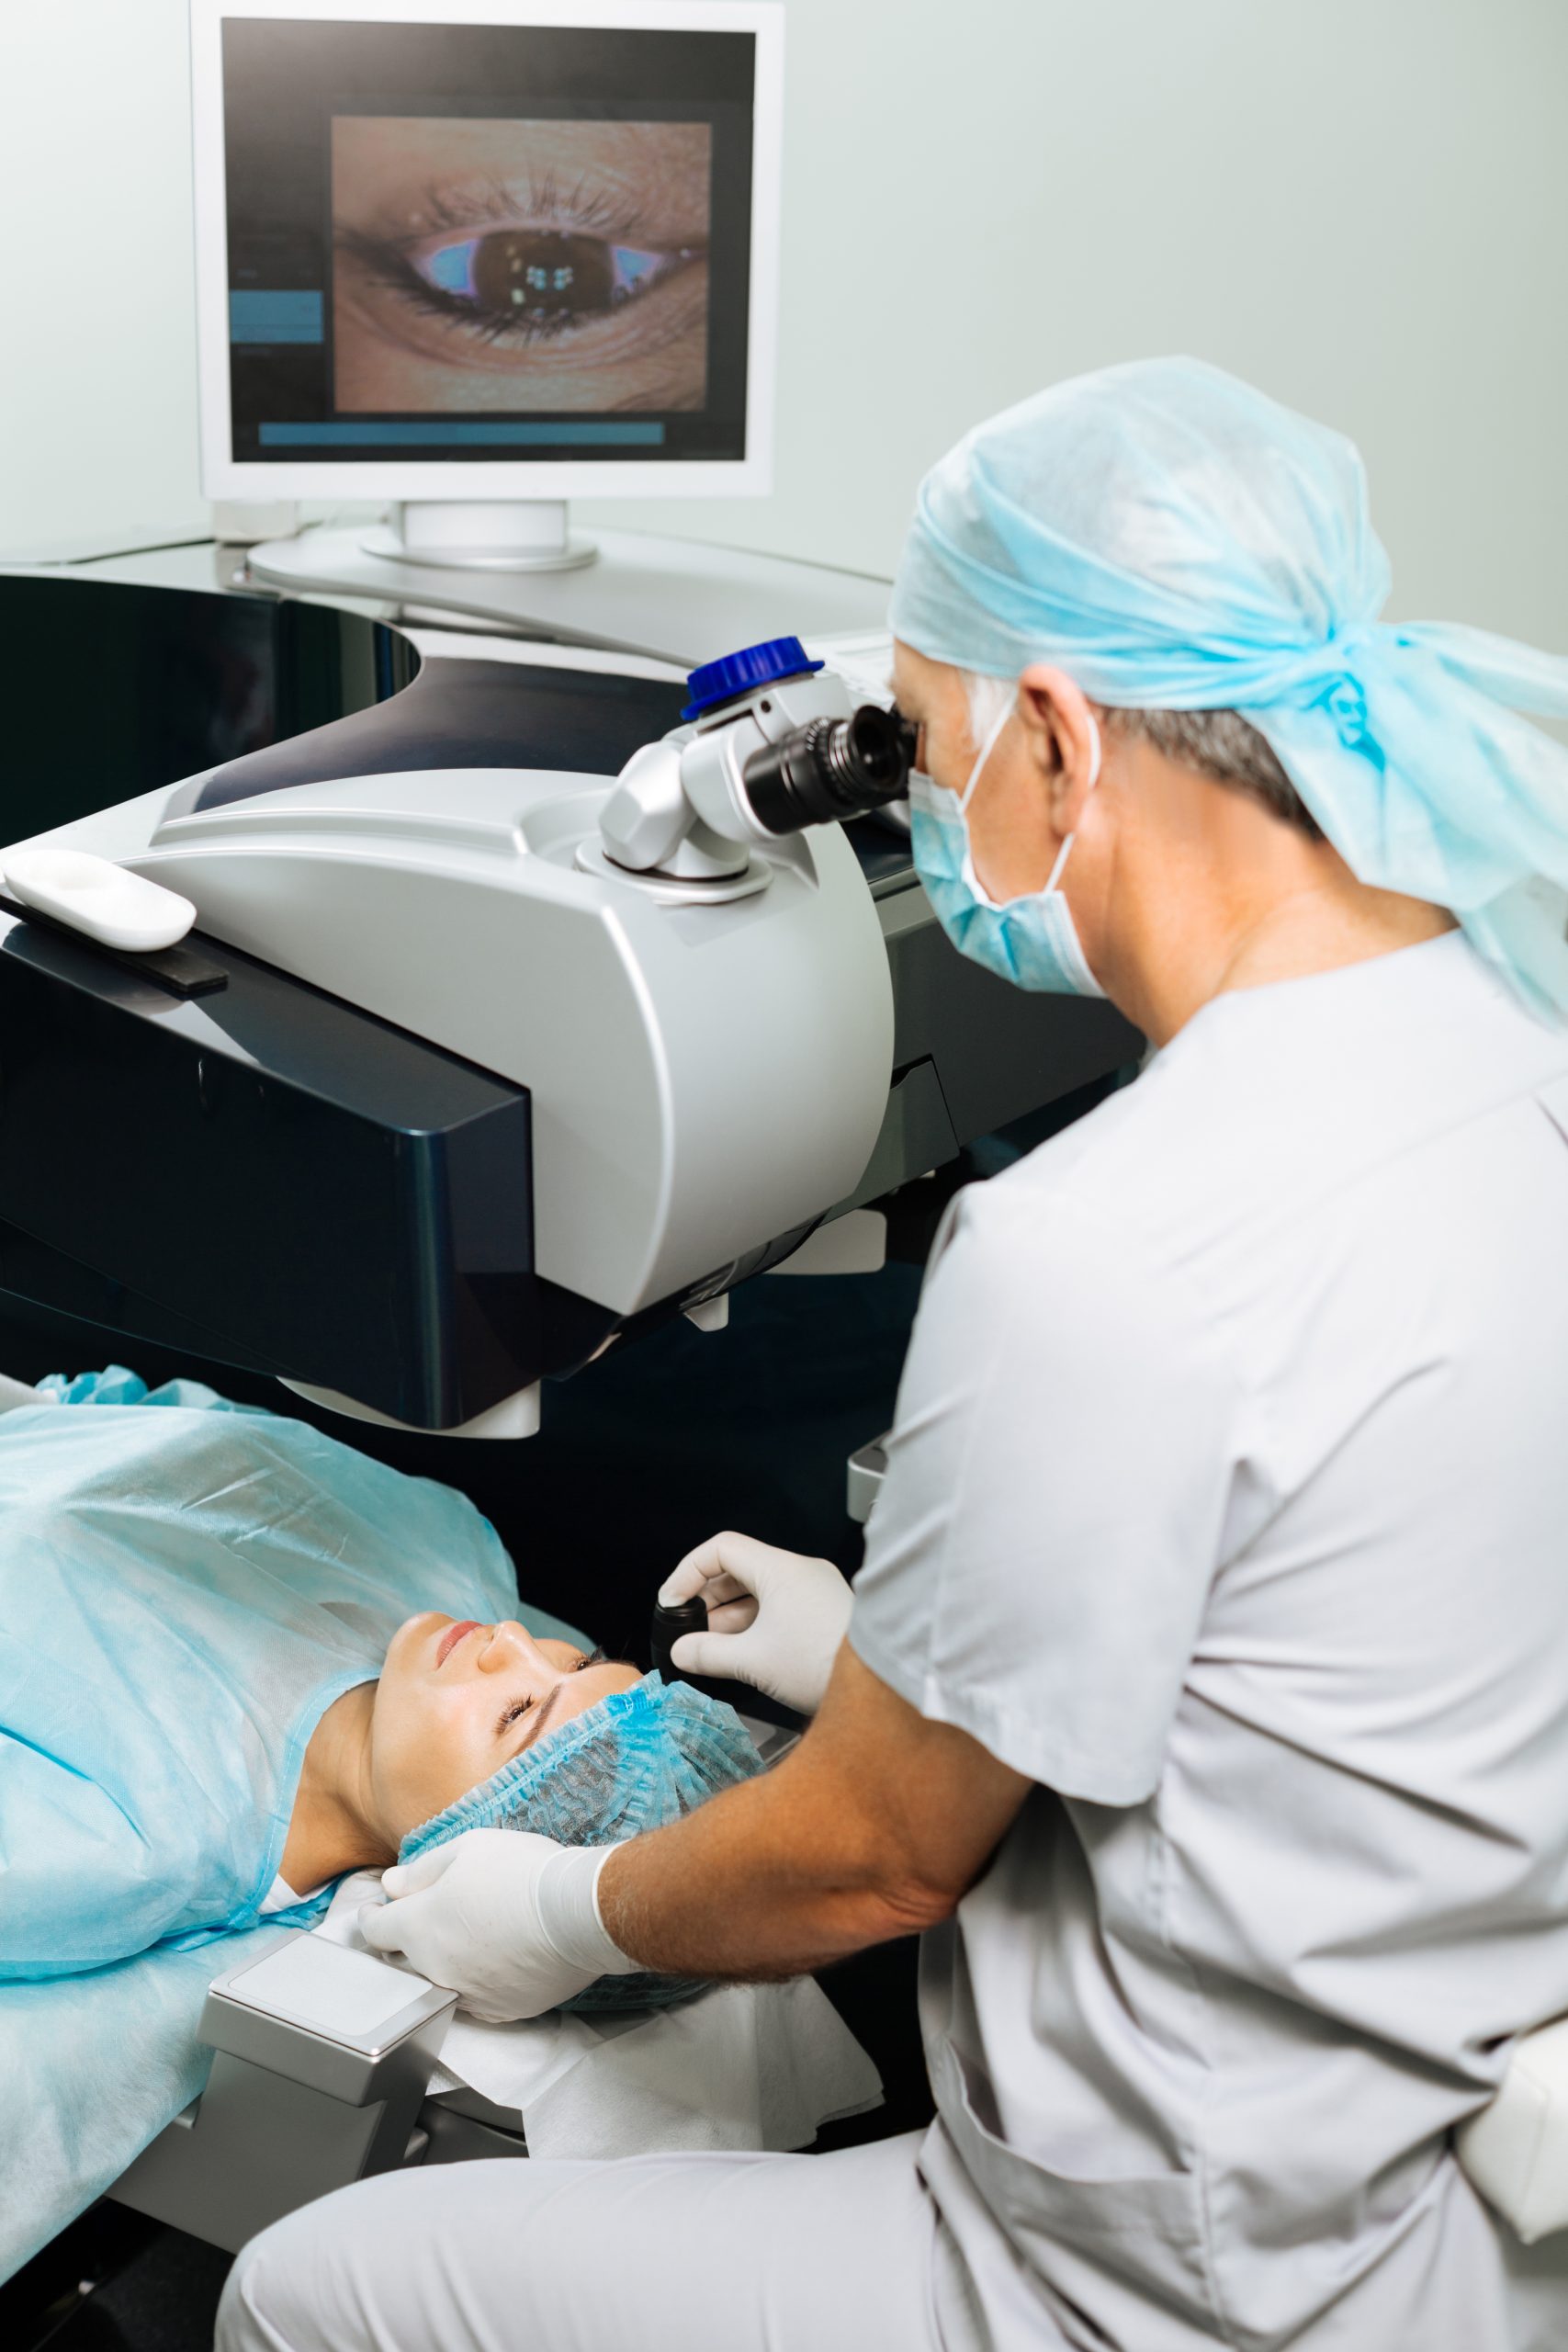 PRK Eye Surgery and LASIK Understanding the Differences